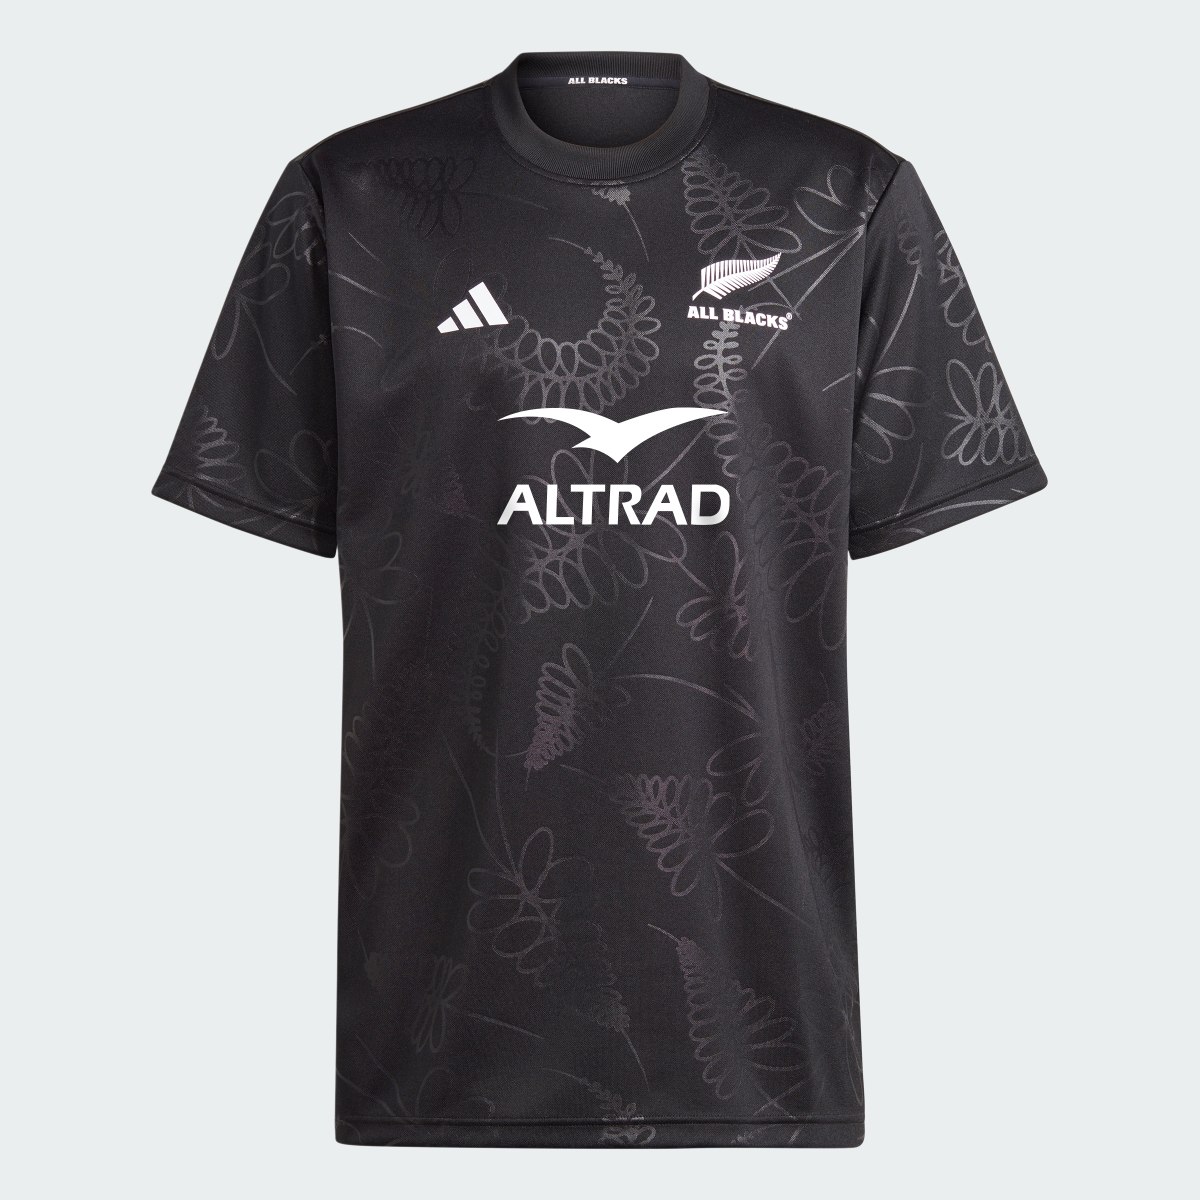 Adidas T-shirt de rugby supporters All Blacks. 5